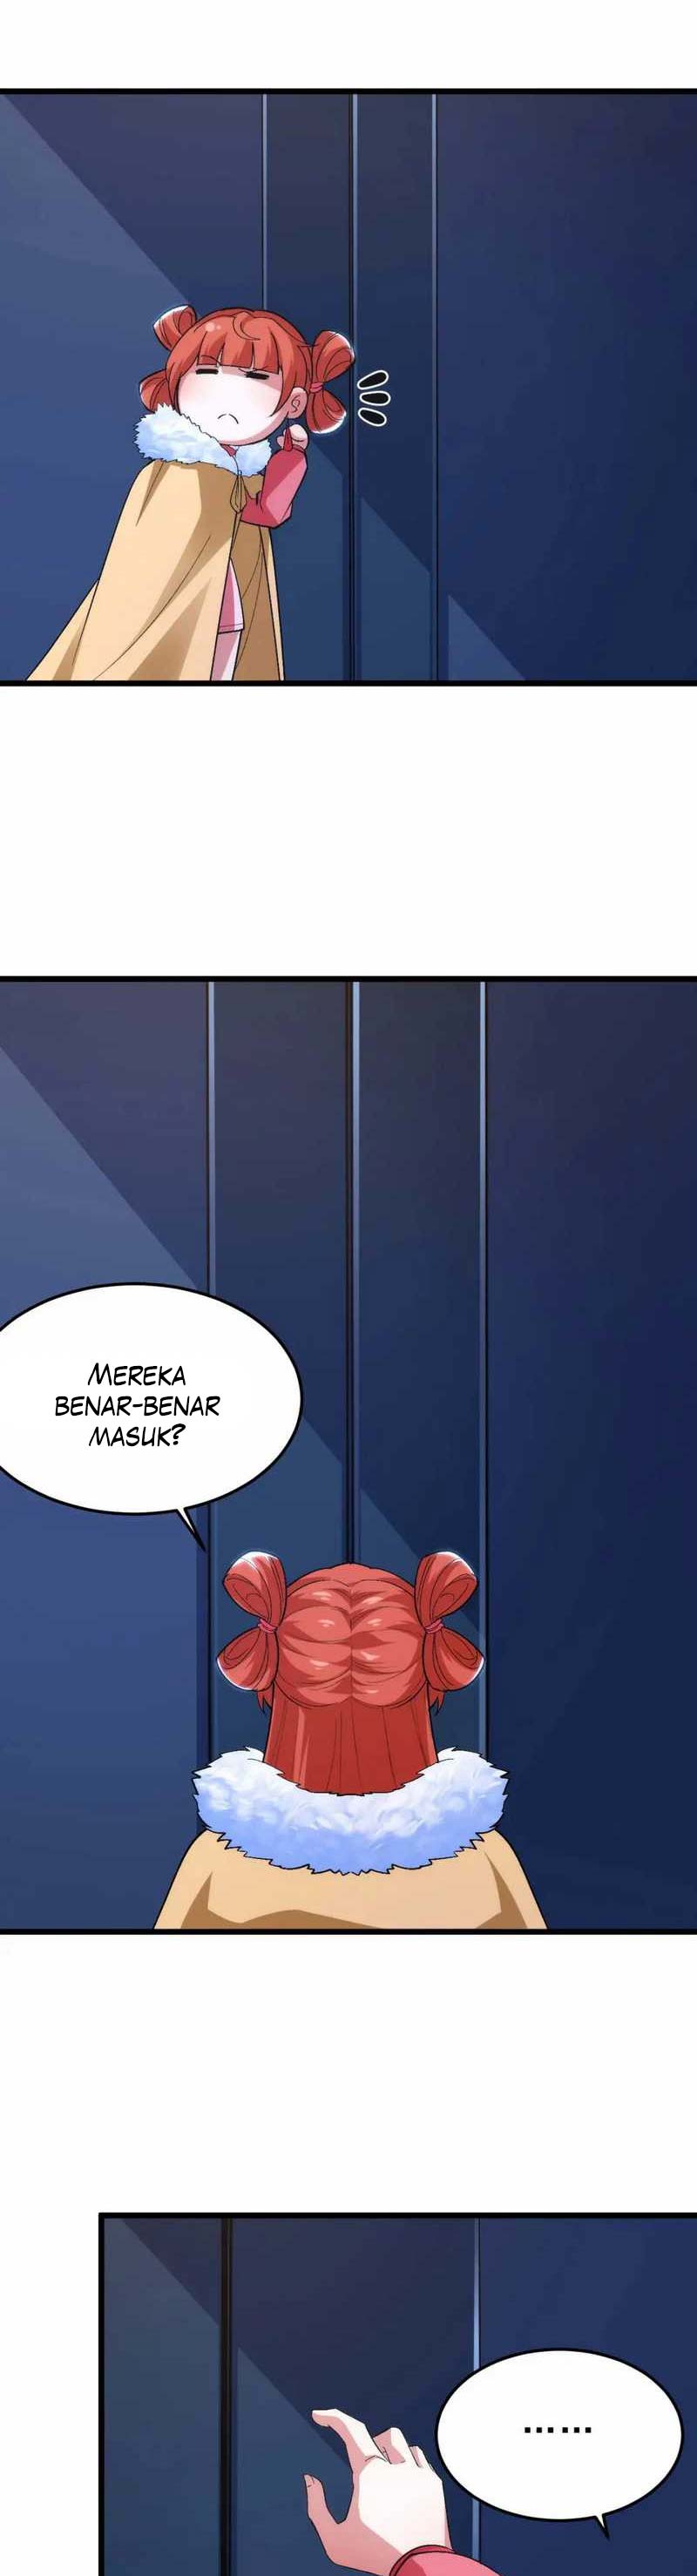 Dilarang COPAS - situs resmi www.mangacanblog.com - Komik i just want to be beaten to death by everyone 147 - chapter 147 148 Indonesia i just want to be beaten to death by everyone 147 - chapter 147 Terbaru 9|Baca Manga Komik Indonesia|Mangacan